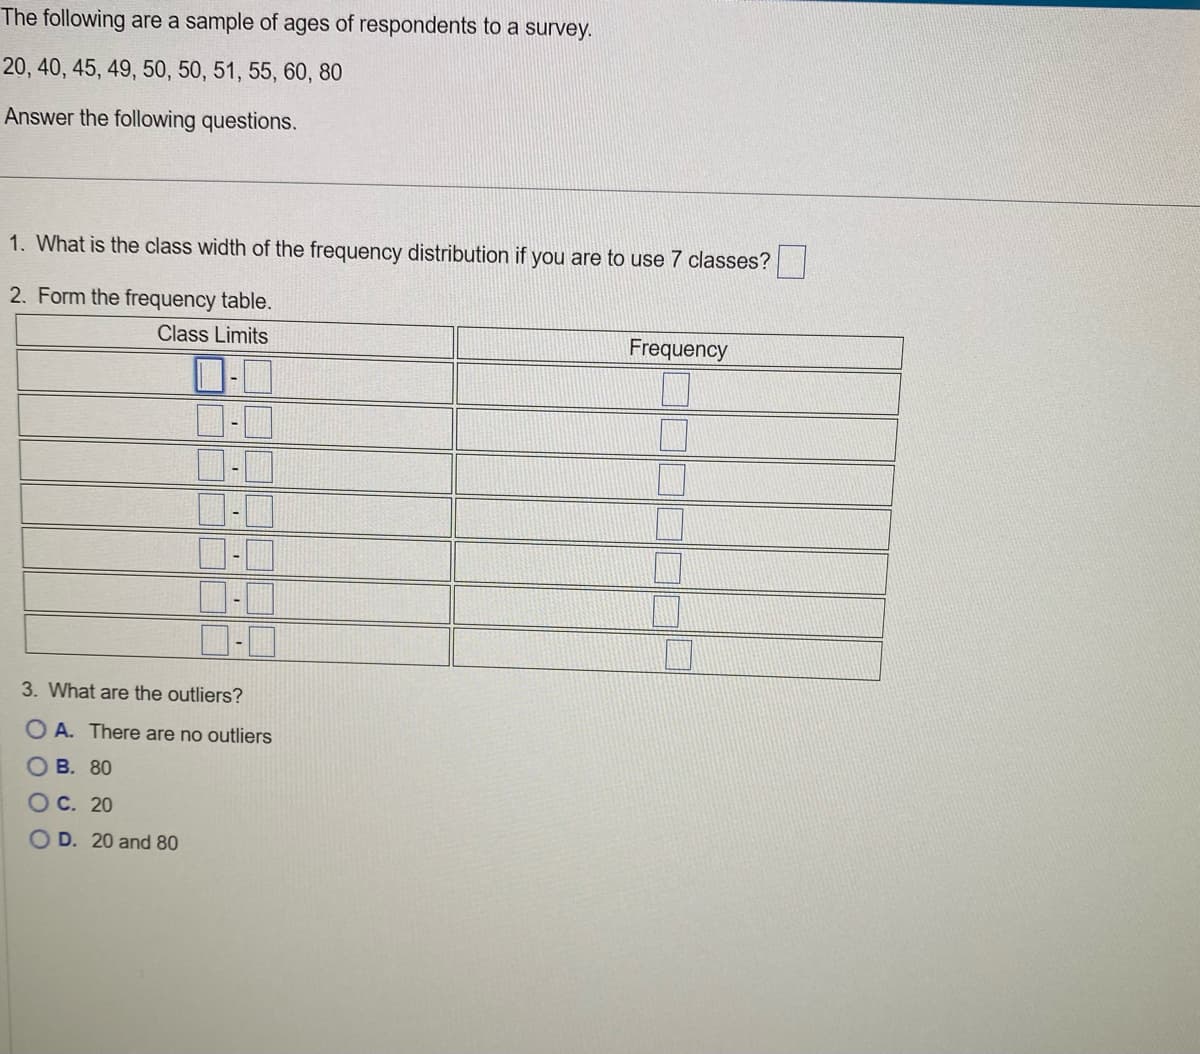 The
following are a sample of ages of respondents to a survey.
20, 40, 45, 49, 50, 50, 51, 55, 60, 80
Answer the following questions.
1. What is the class width of the frequency distribution if you are to use 7 classes?
2. Form the frequency table.
Class Limits
3. What are the outliers?
OA. There are no outliers
OB. 80
OC. 20
OD. 20 and 80
Frequency